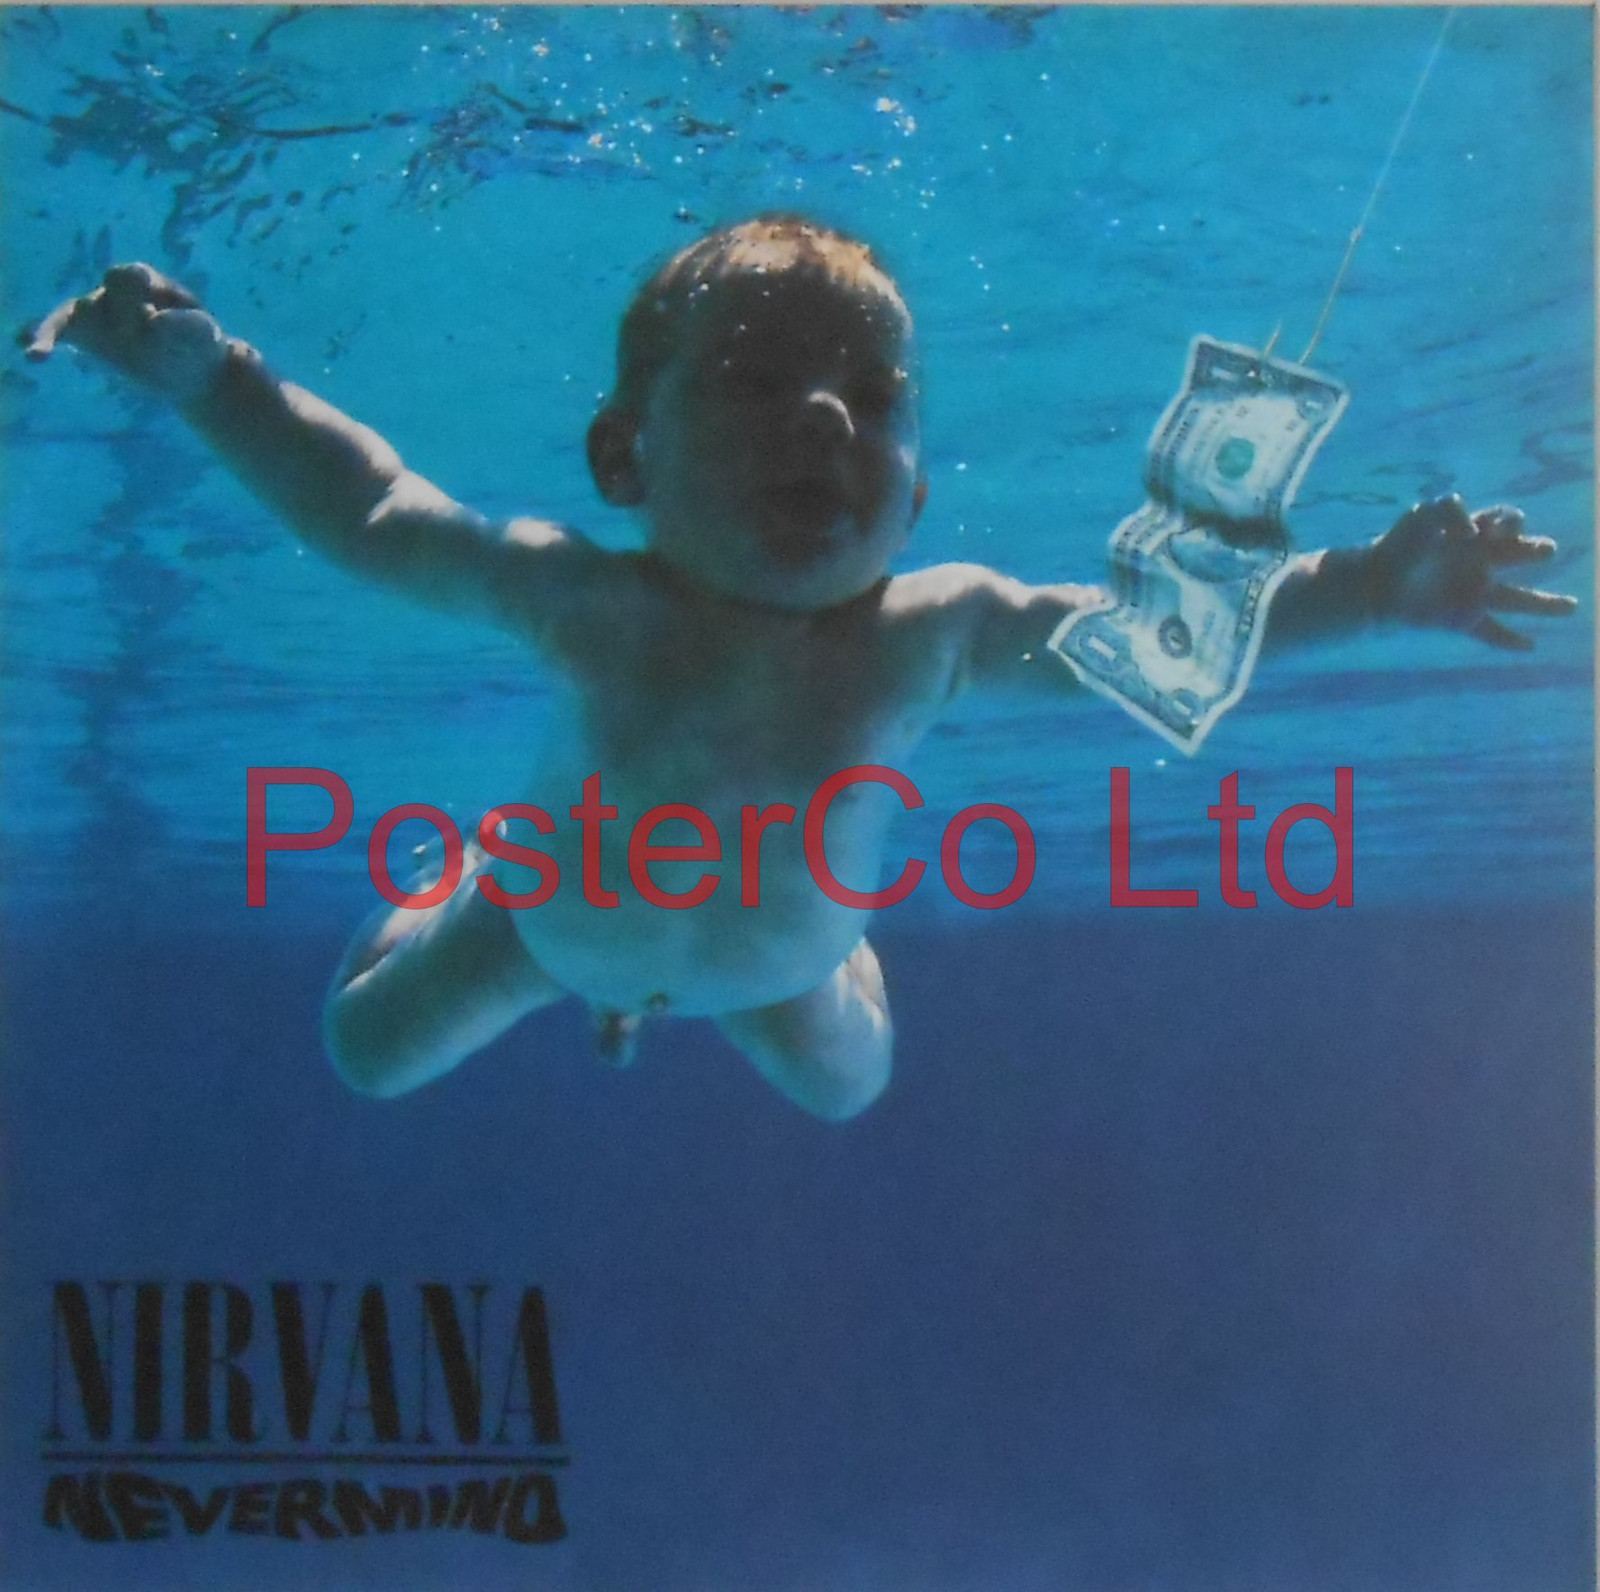 nirvana nevermind cover image